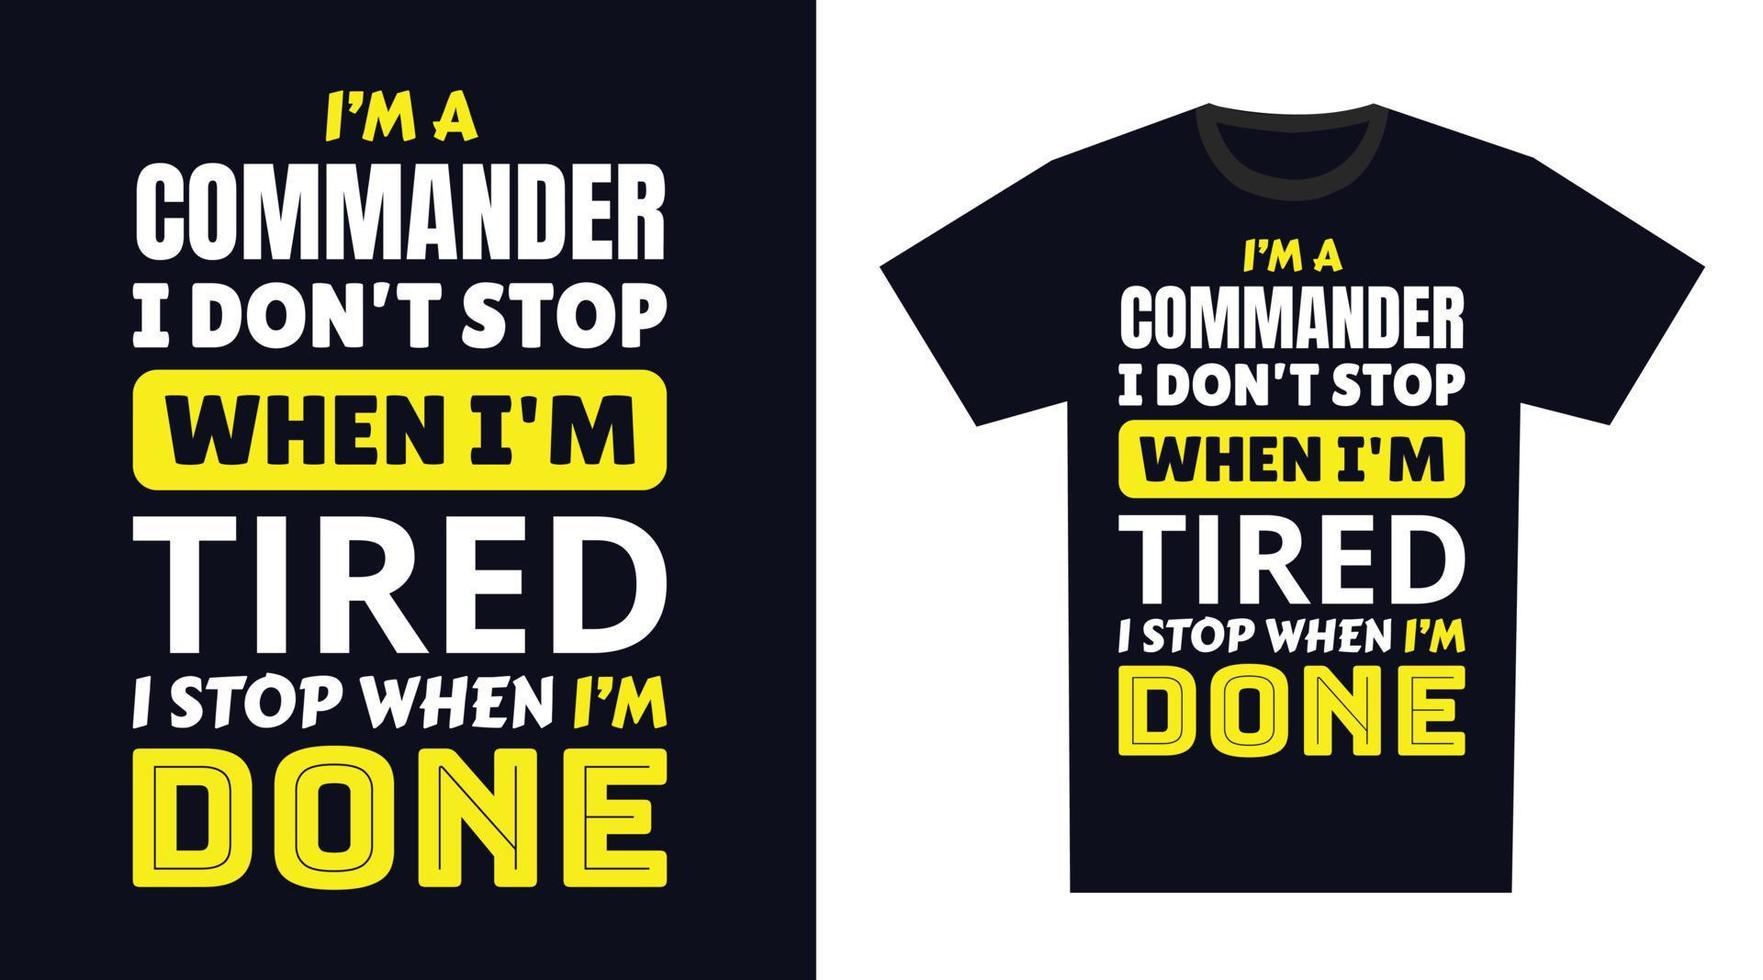 Commander T Shirt Design. I 'm a Commander I Don't Stop When I'm Tired, I Stop When I'm Done vector